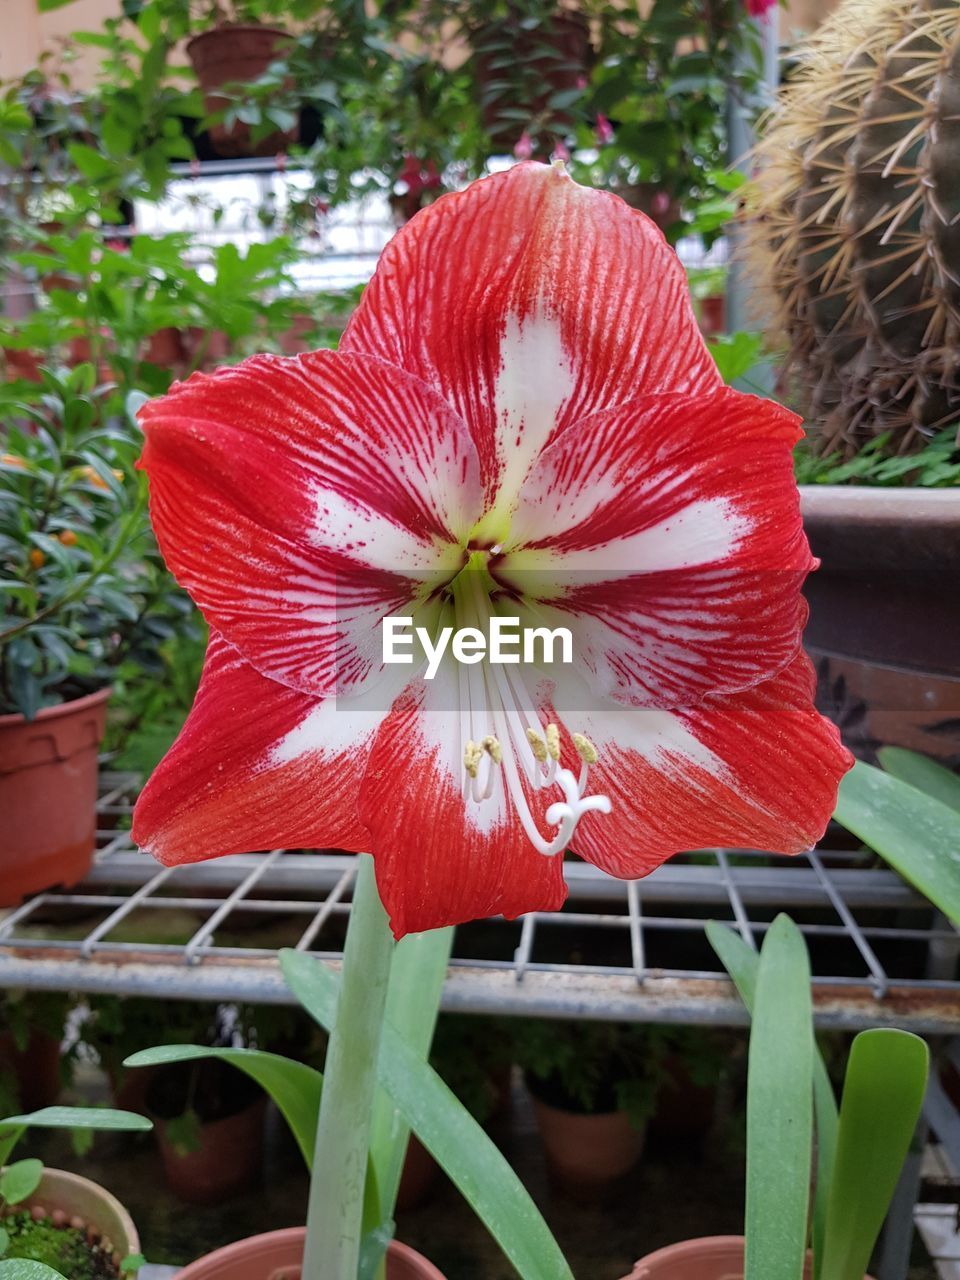 CLOSE-UP OF FRESH RED FLOWER BLOOMING IN GARDEN